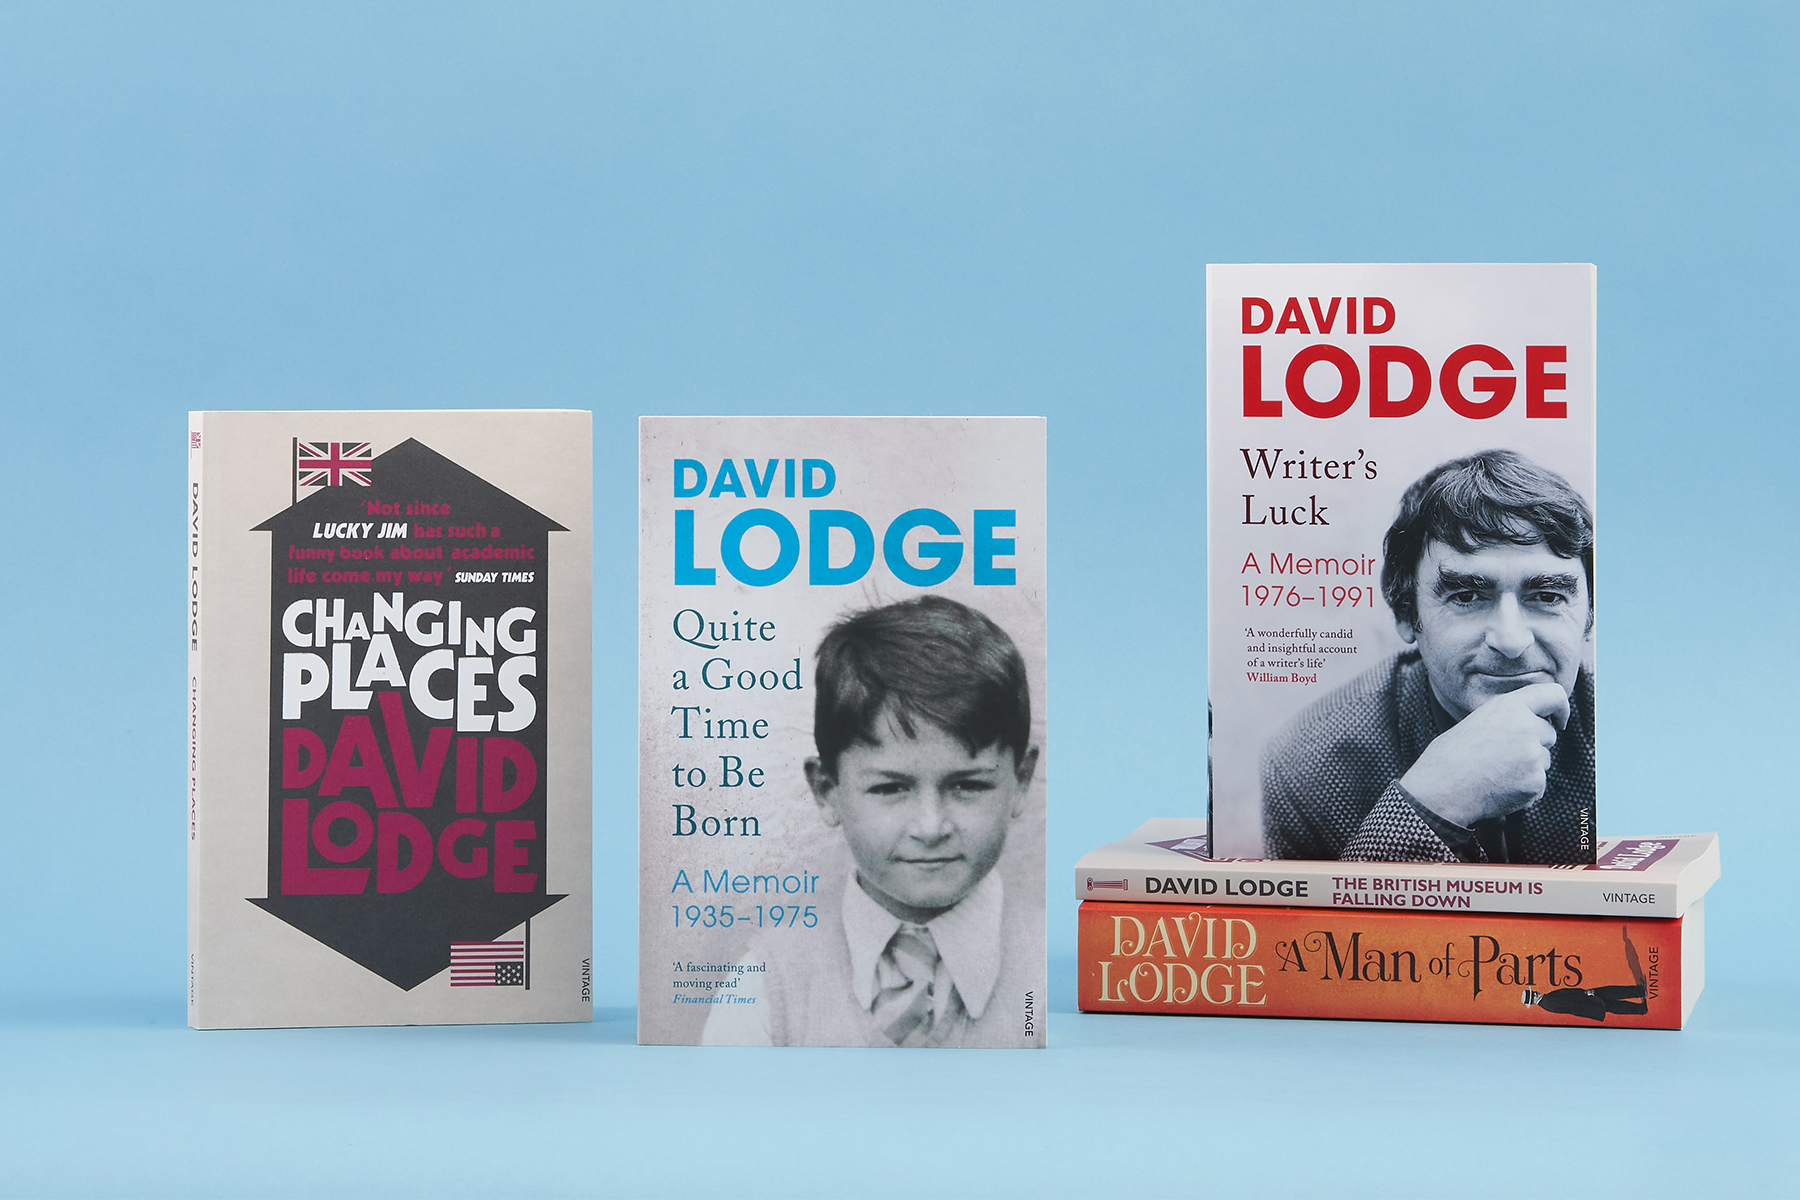 Books by David Lodge on a blue background